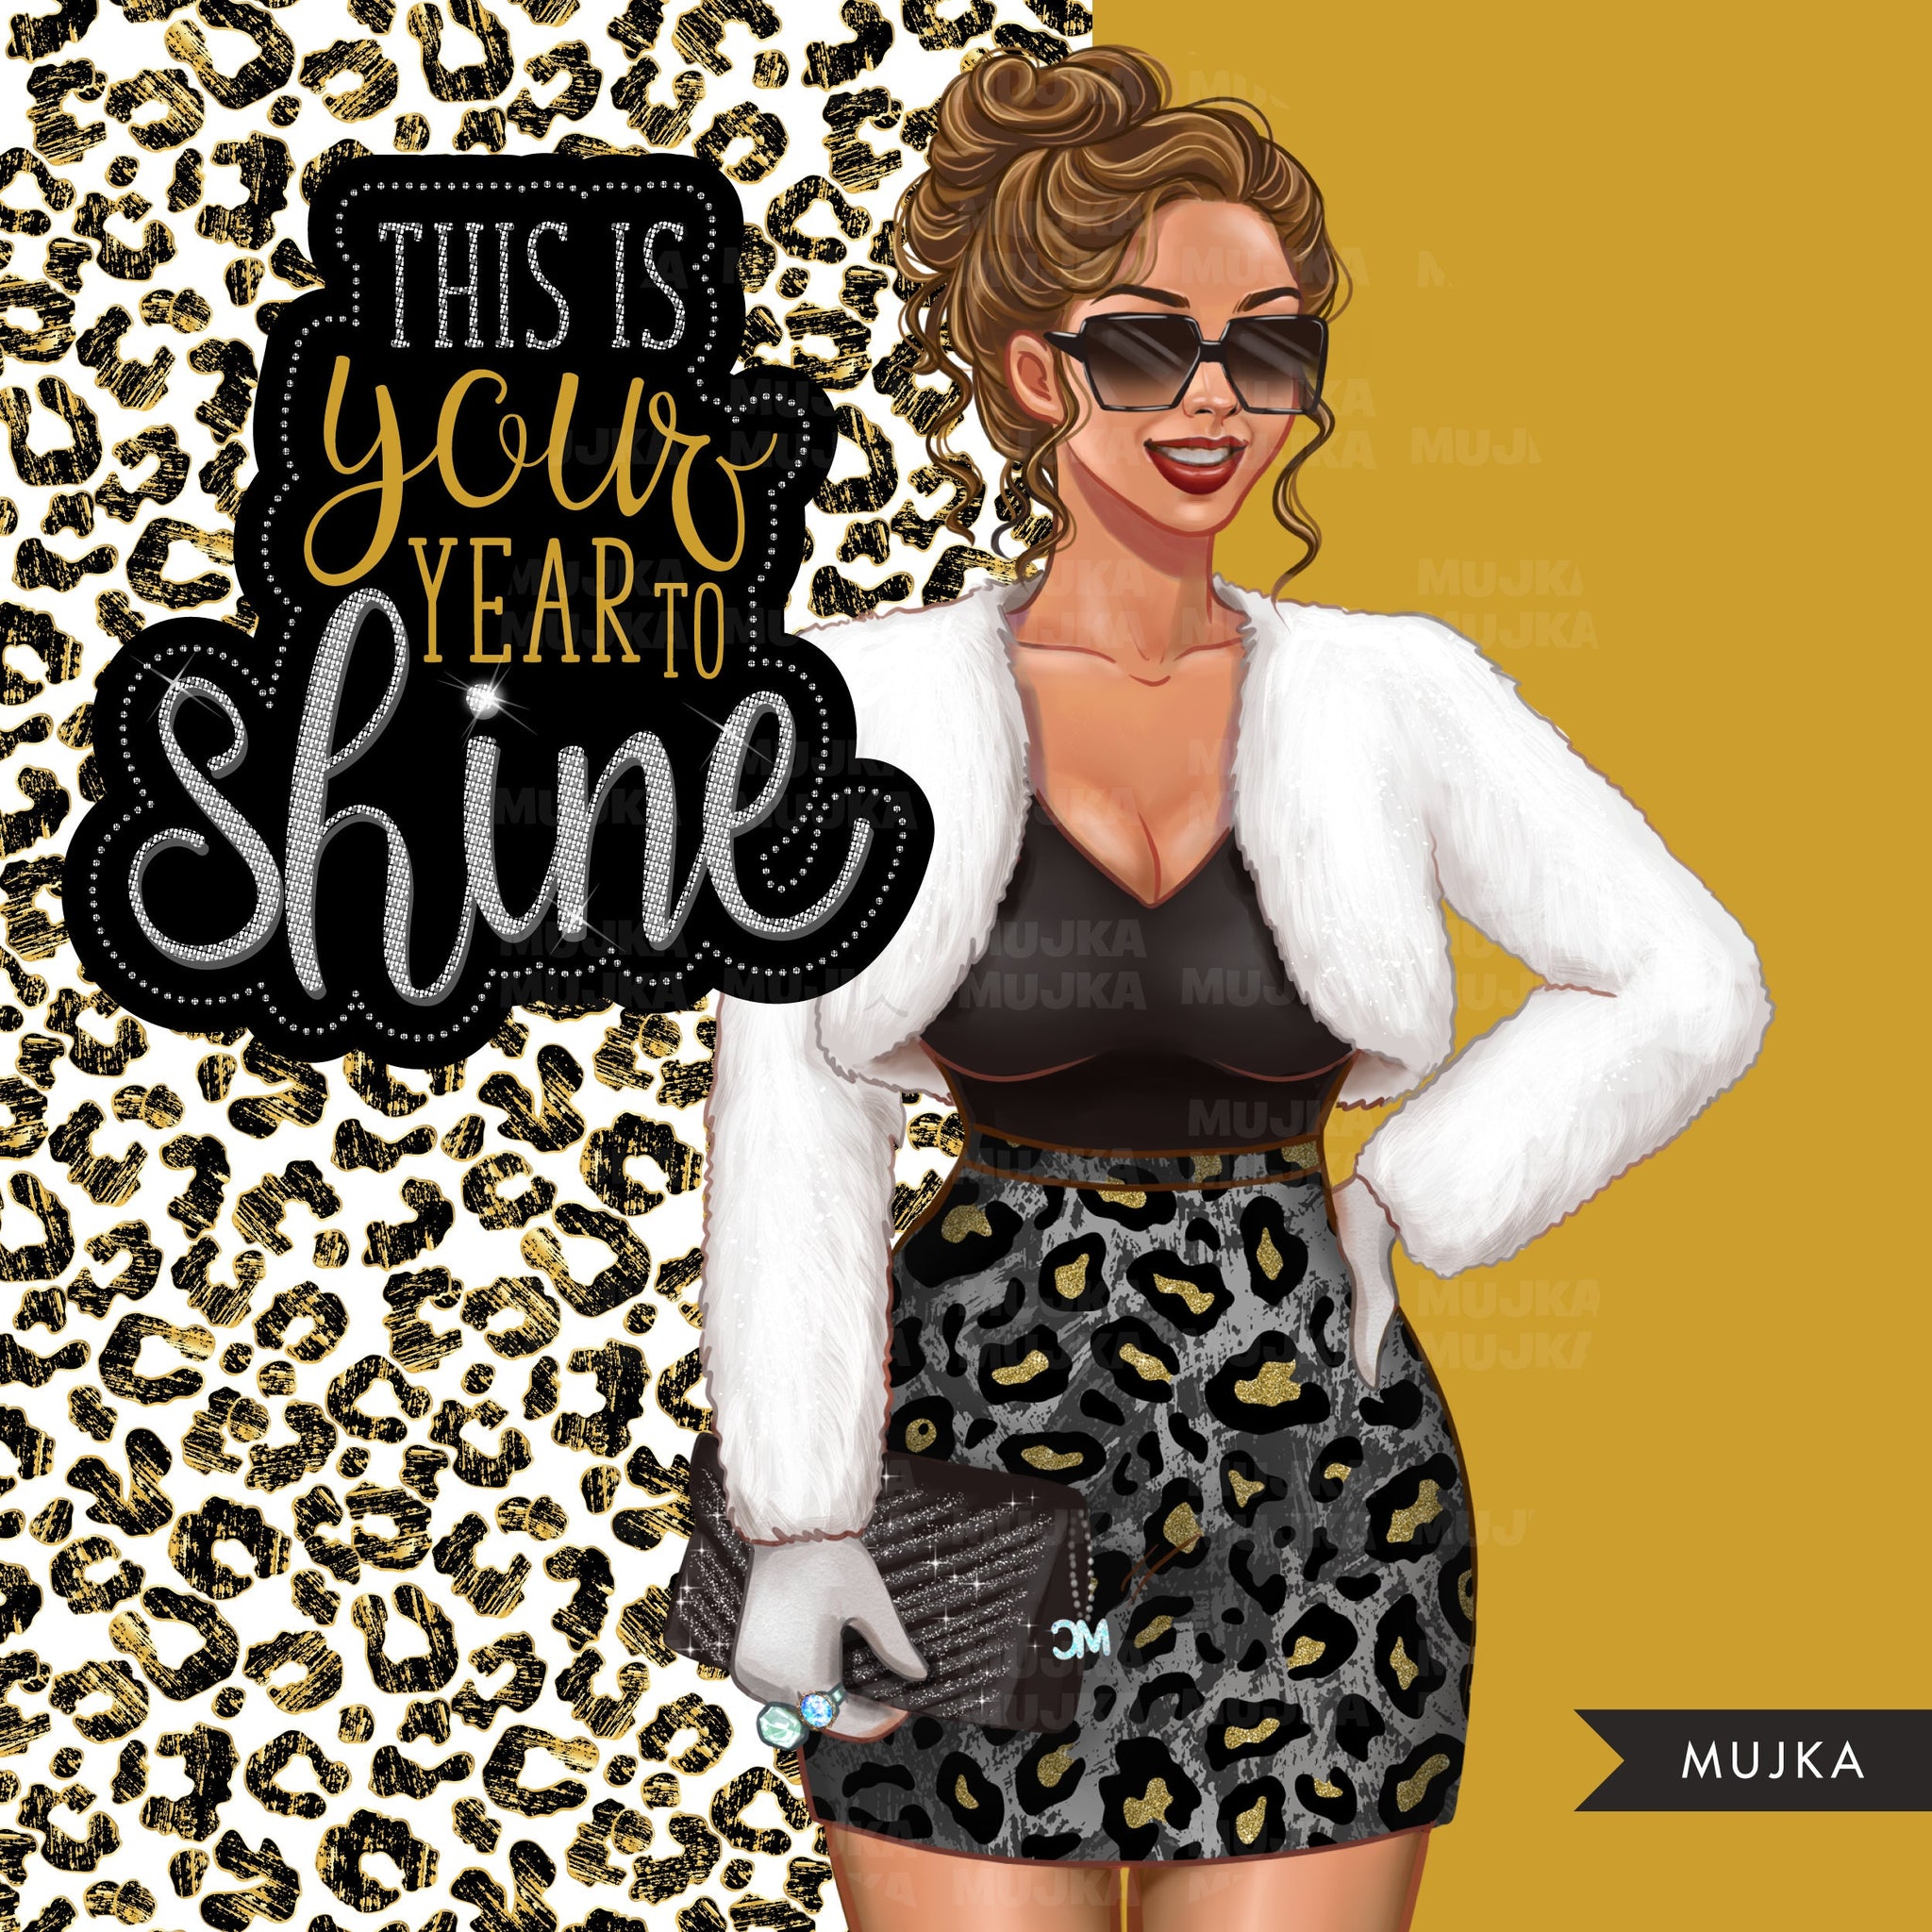 Fashion Clipart, This is your year to shine png, Woman clipart, leopard png, new year png, sublimation designs, planner graphics, pod ready